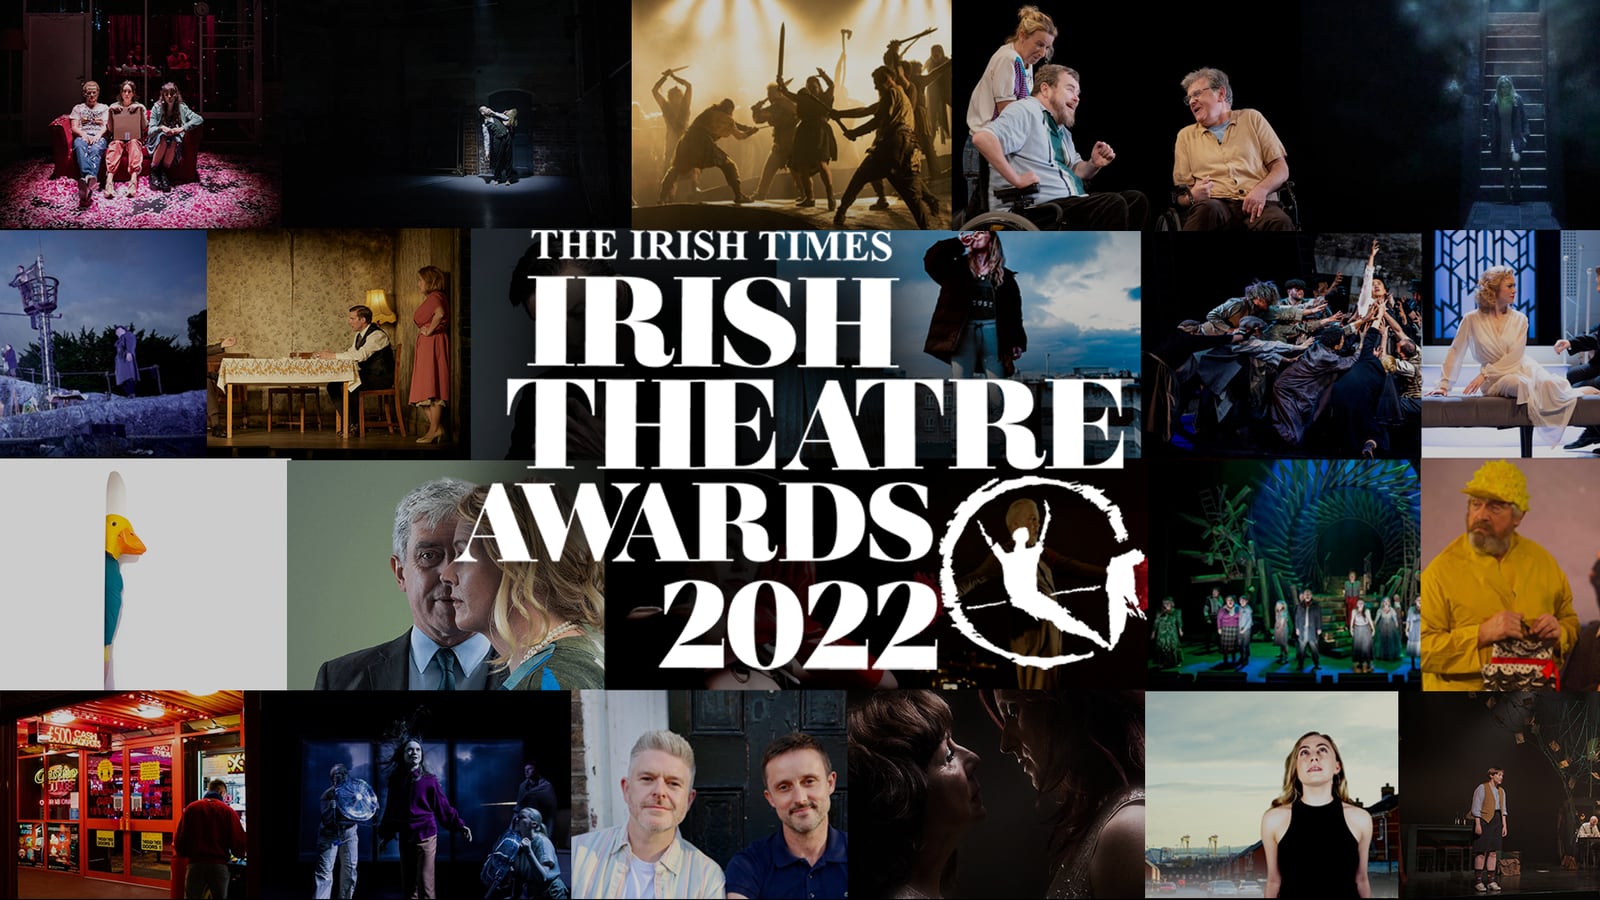 Have your say the Irish Times Irish Theatre Awards audience choice